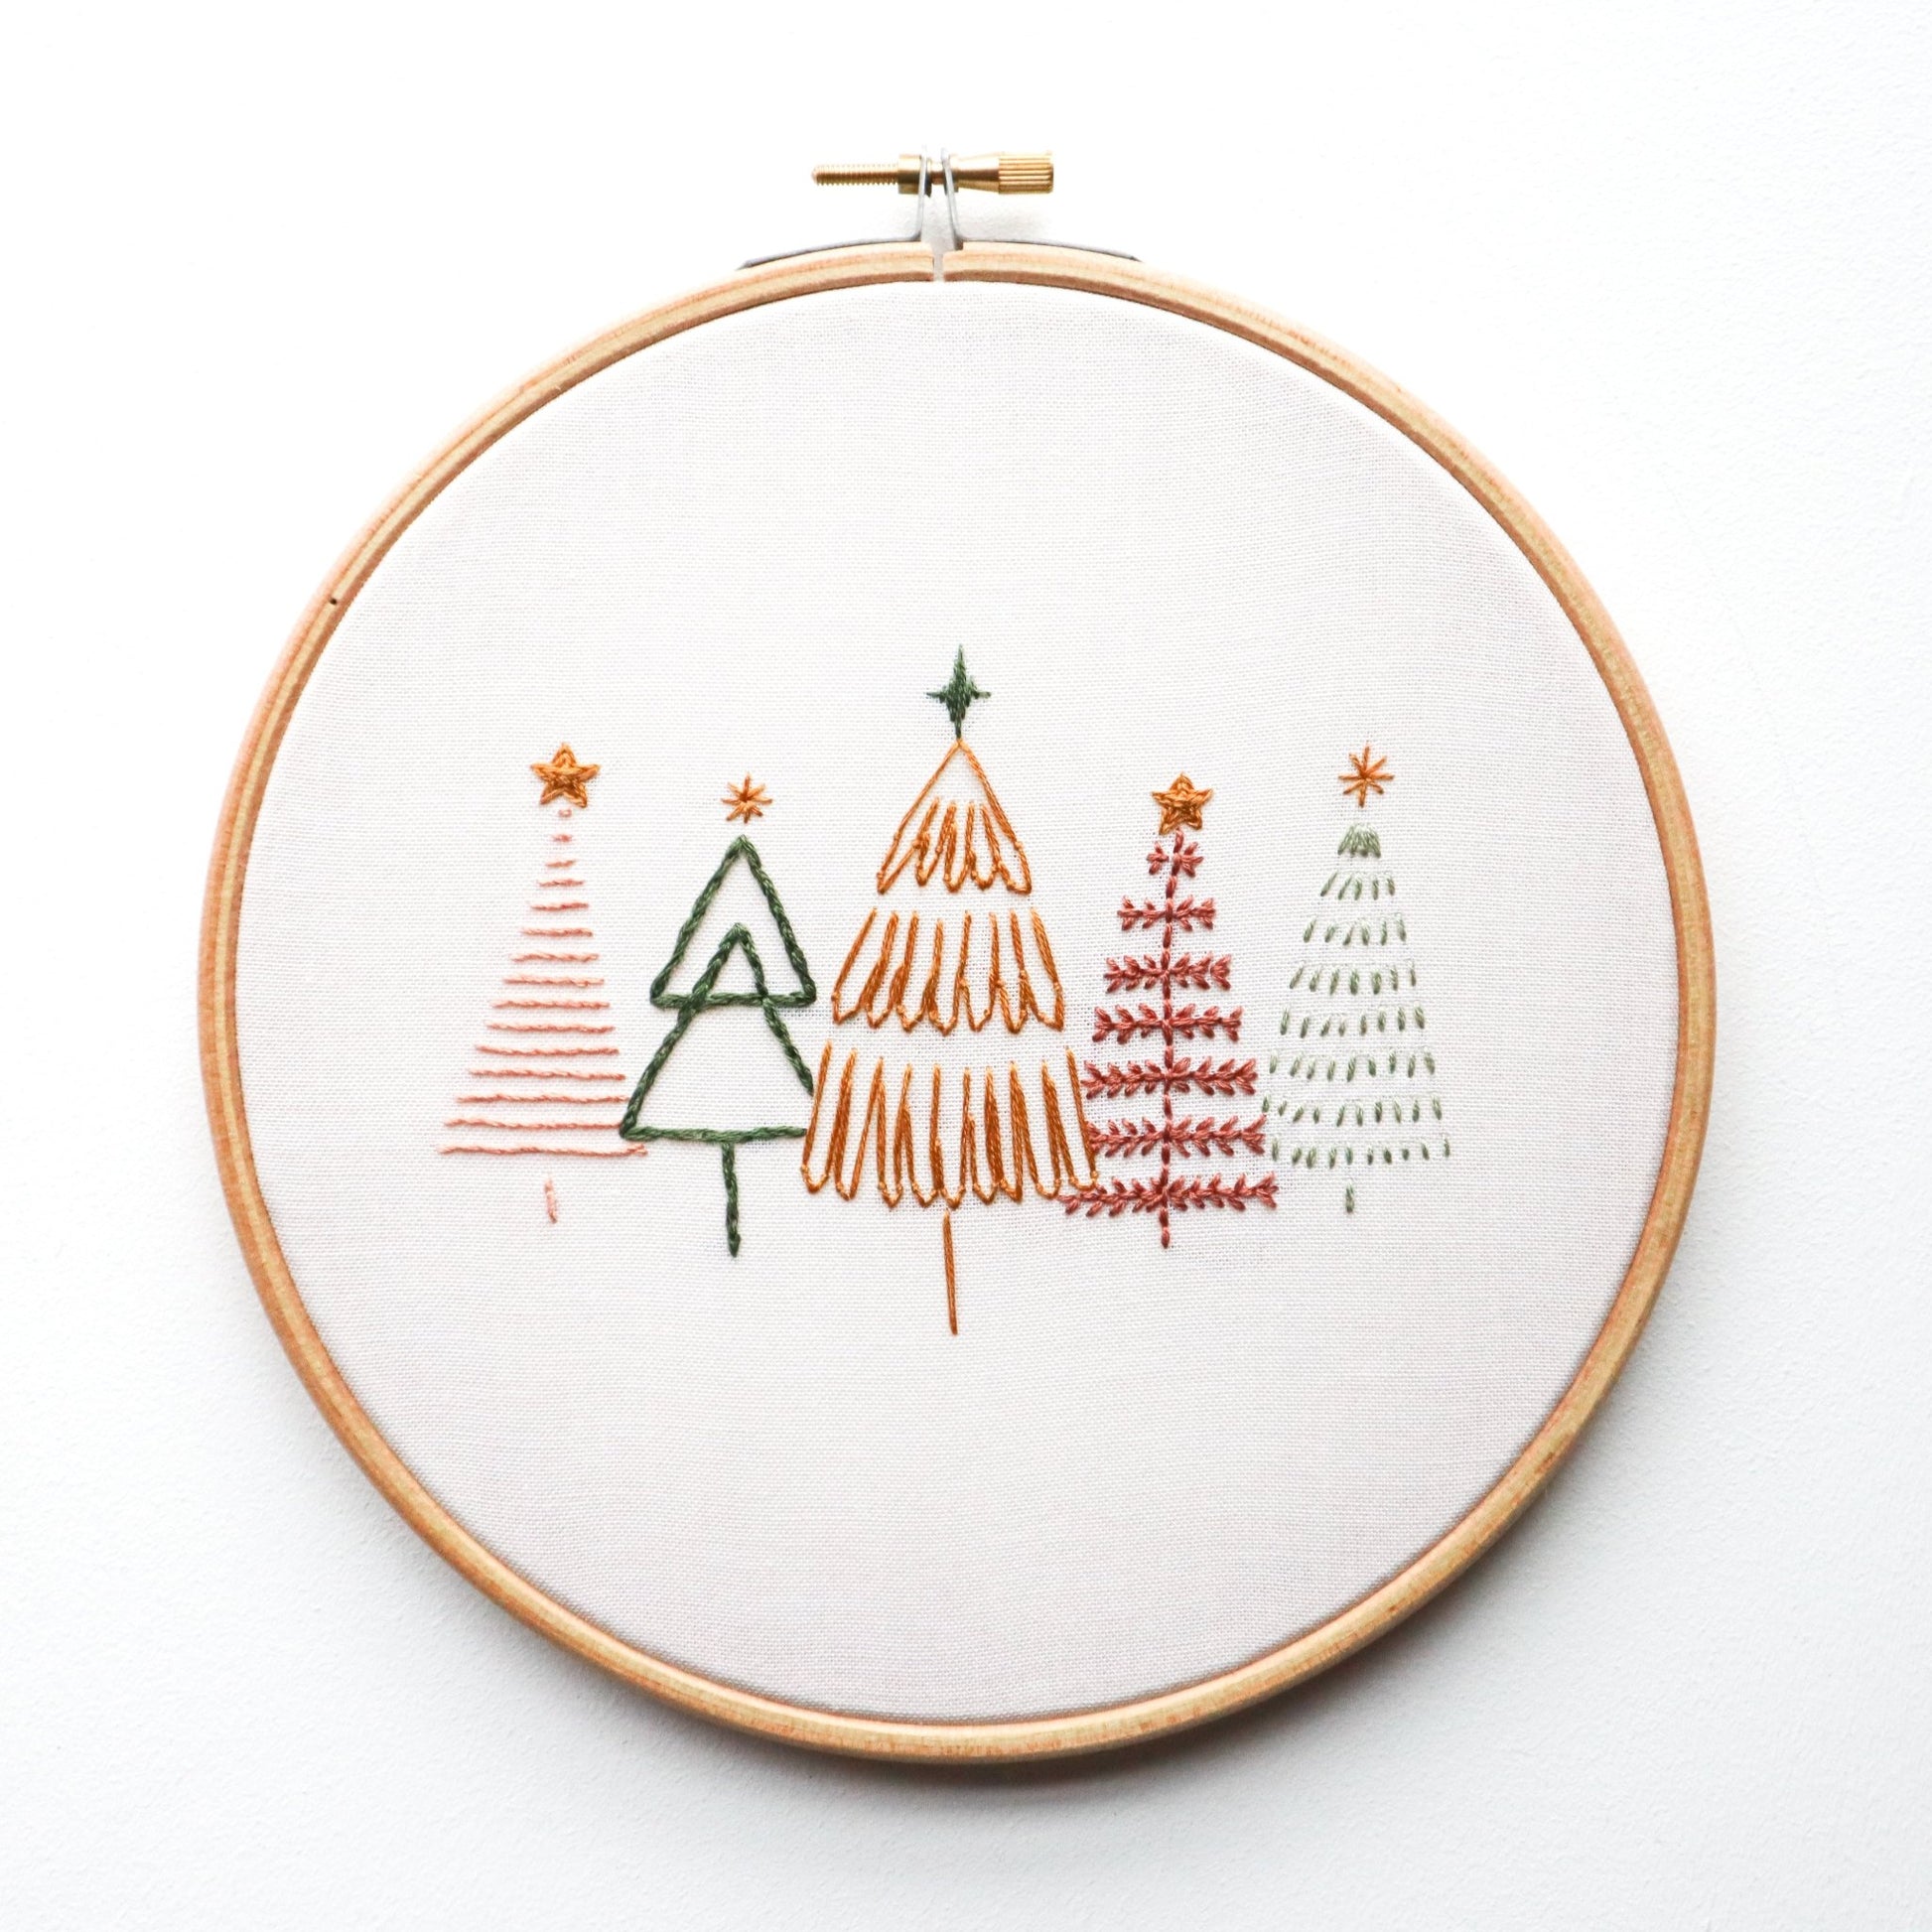 Christmas trees embroidery kit - Stitch Happy.